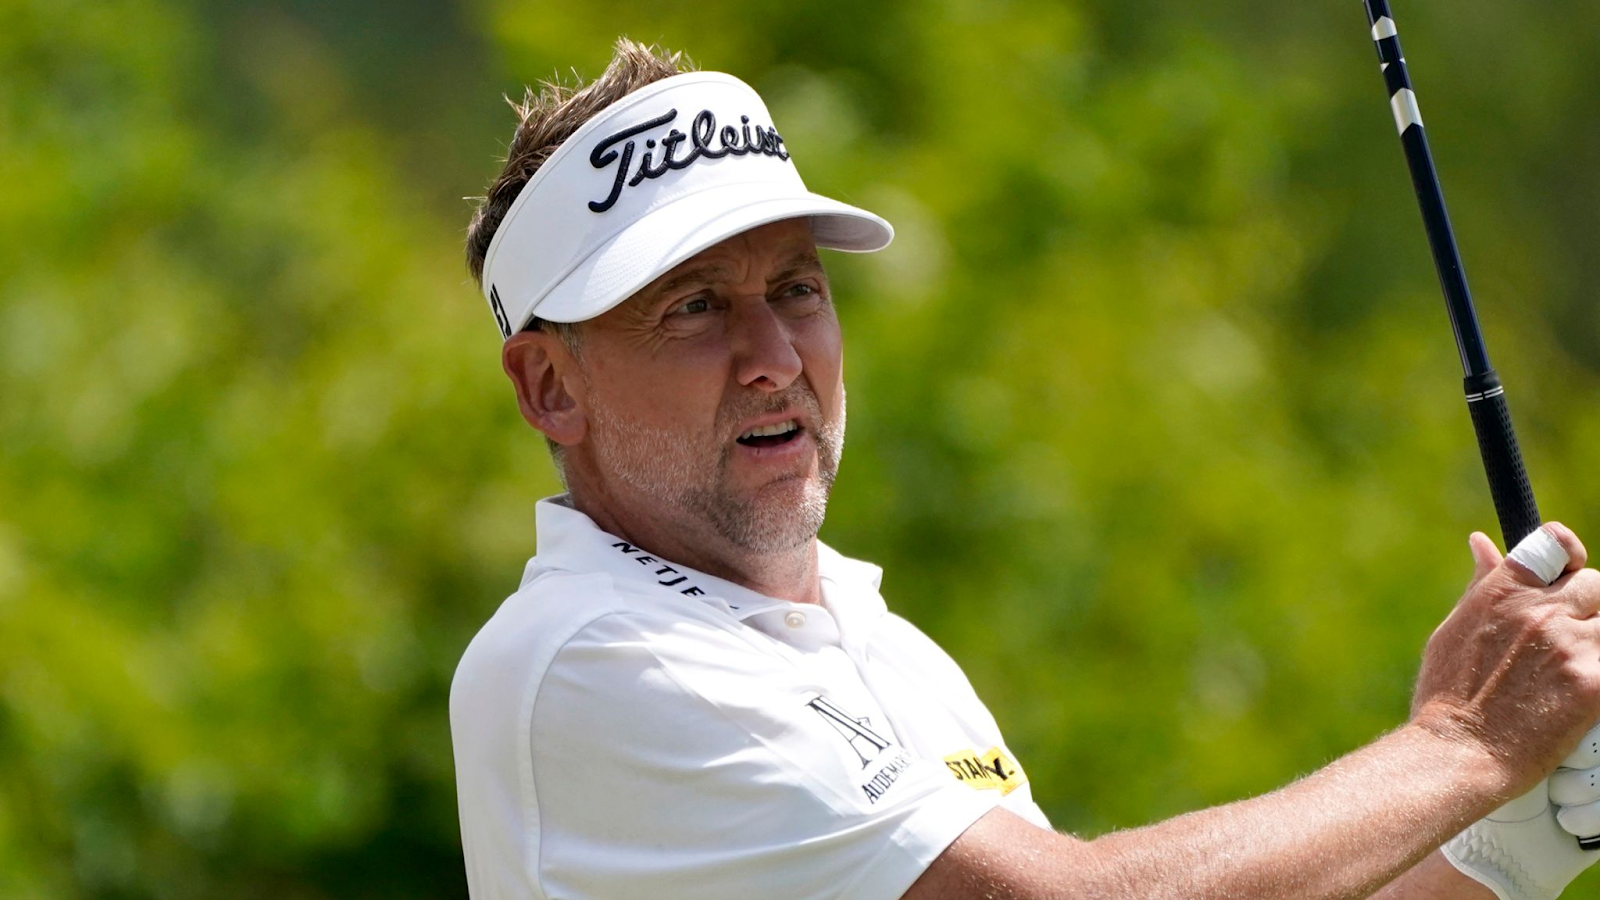 Judge gives Ian Poulter and others a green flag to play in the Genesis Scottish Open Ian Poulter and two other DP World Tour players who were not allowed to play in the Scottish Open this week